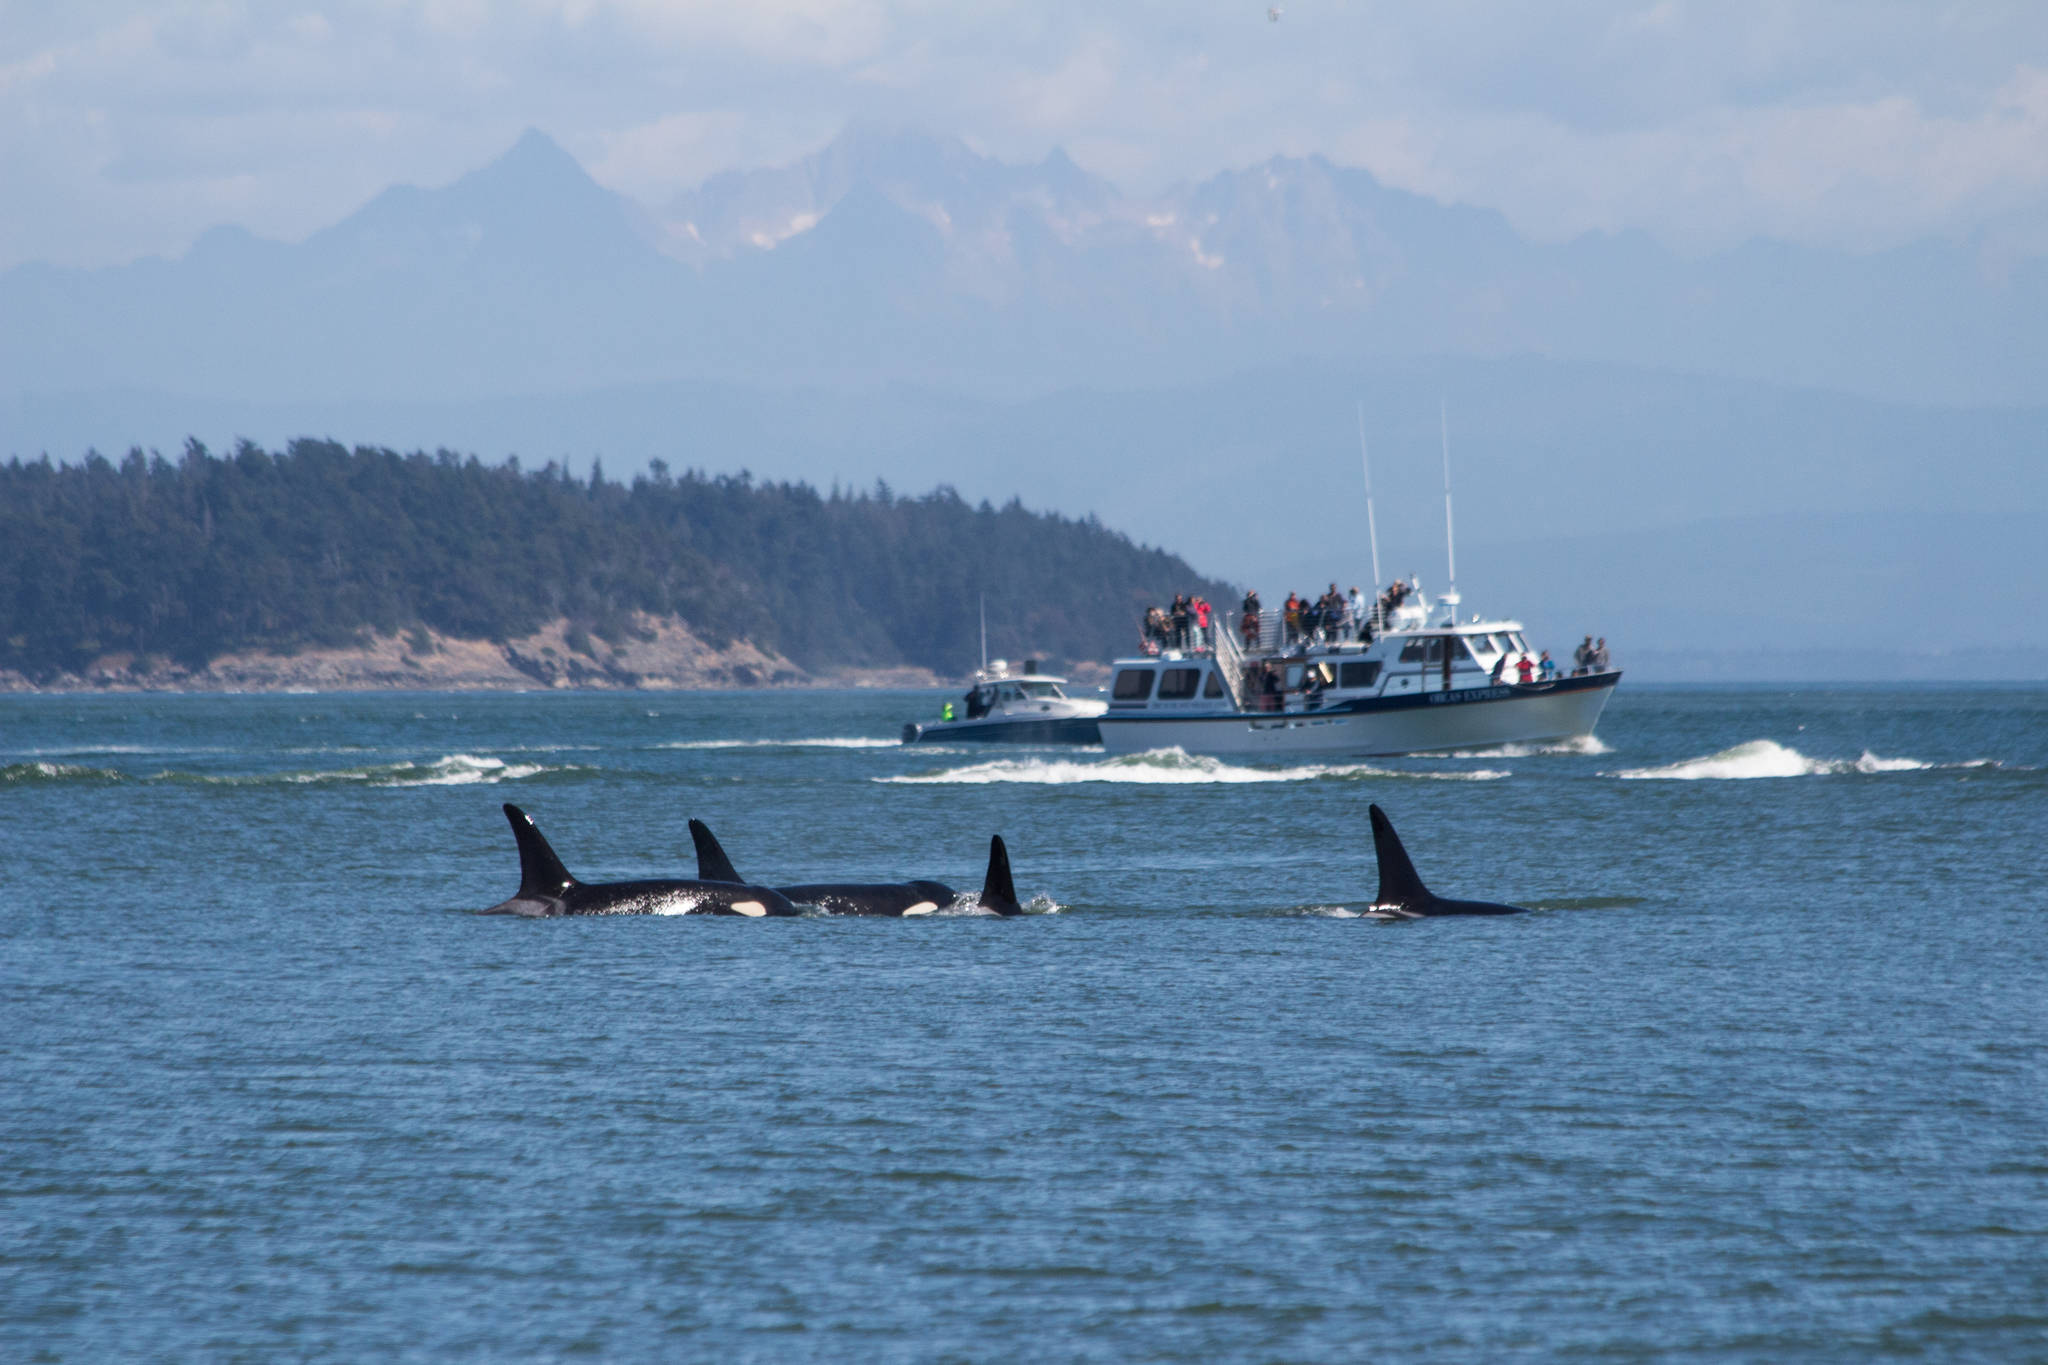 A reminder that the Southern resident orcas are still struggling